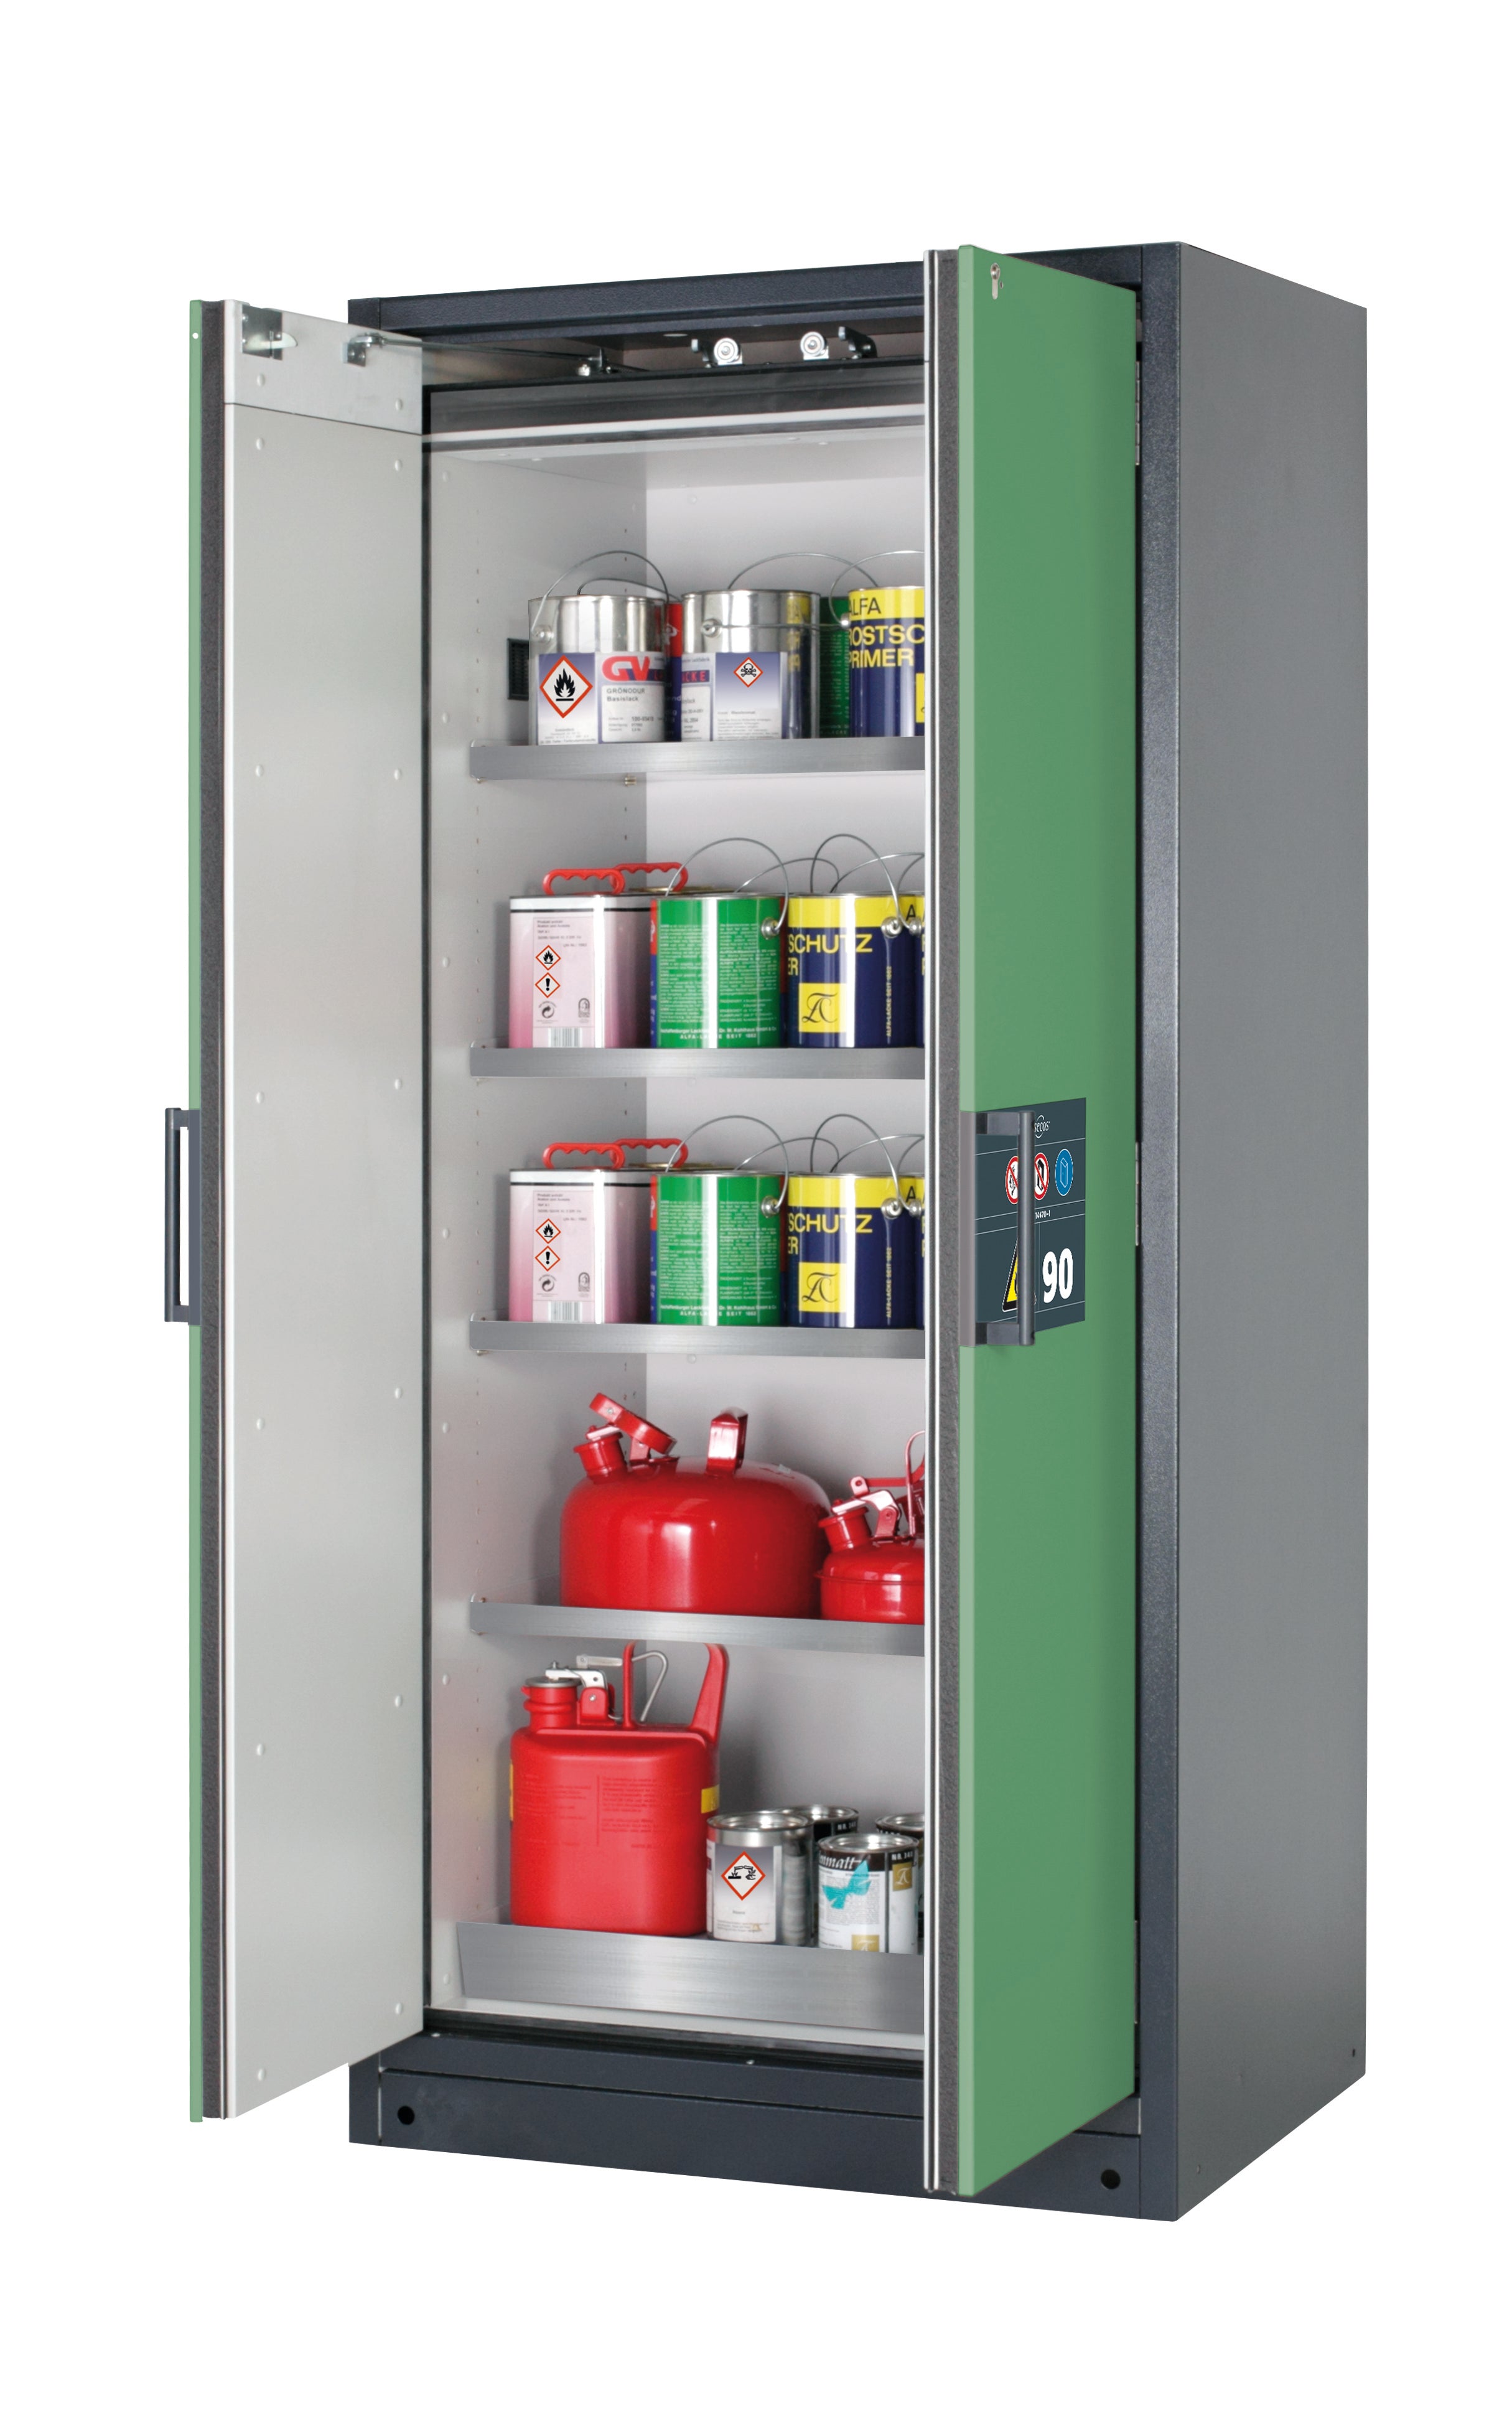 Type 90 safety storage cabinet Q-CLASSIC-90 model Q90.195.090 in reseda green RAL 6011 with 4x shelf standard (stainless steel 1.4301),